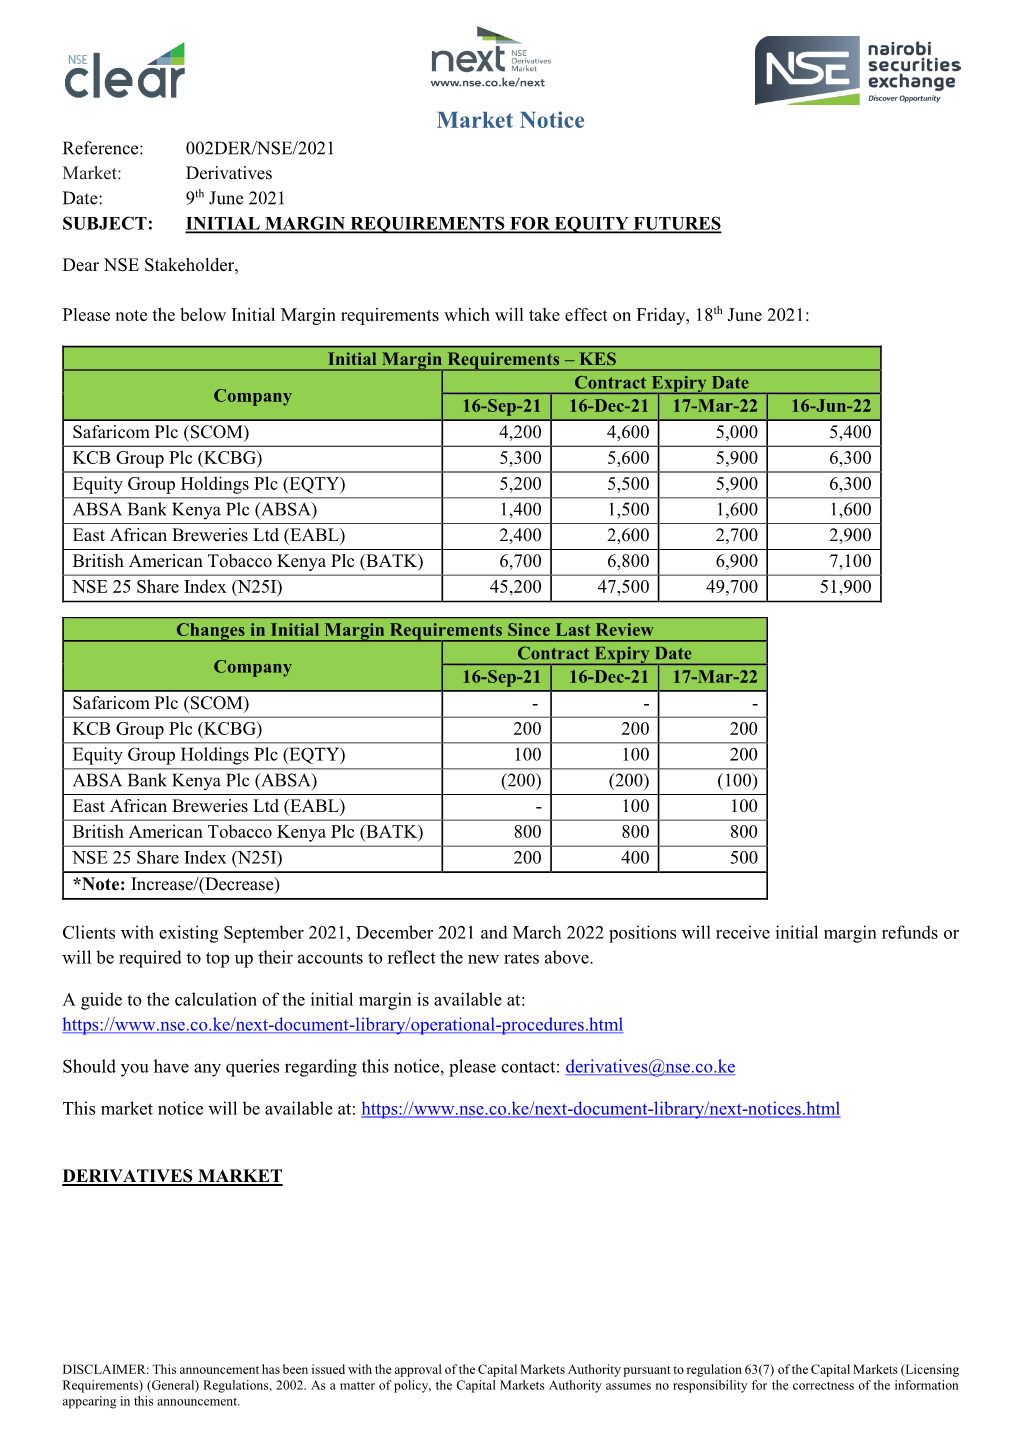 Market Notice Reference: 002DER/NSE/2021 Market: Derivatives Date: 9Th June 2021 SUBJECT: INITIAL MARGIN REQUIREMENTS for EQUITY FUTURES